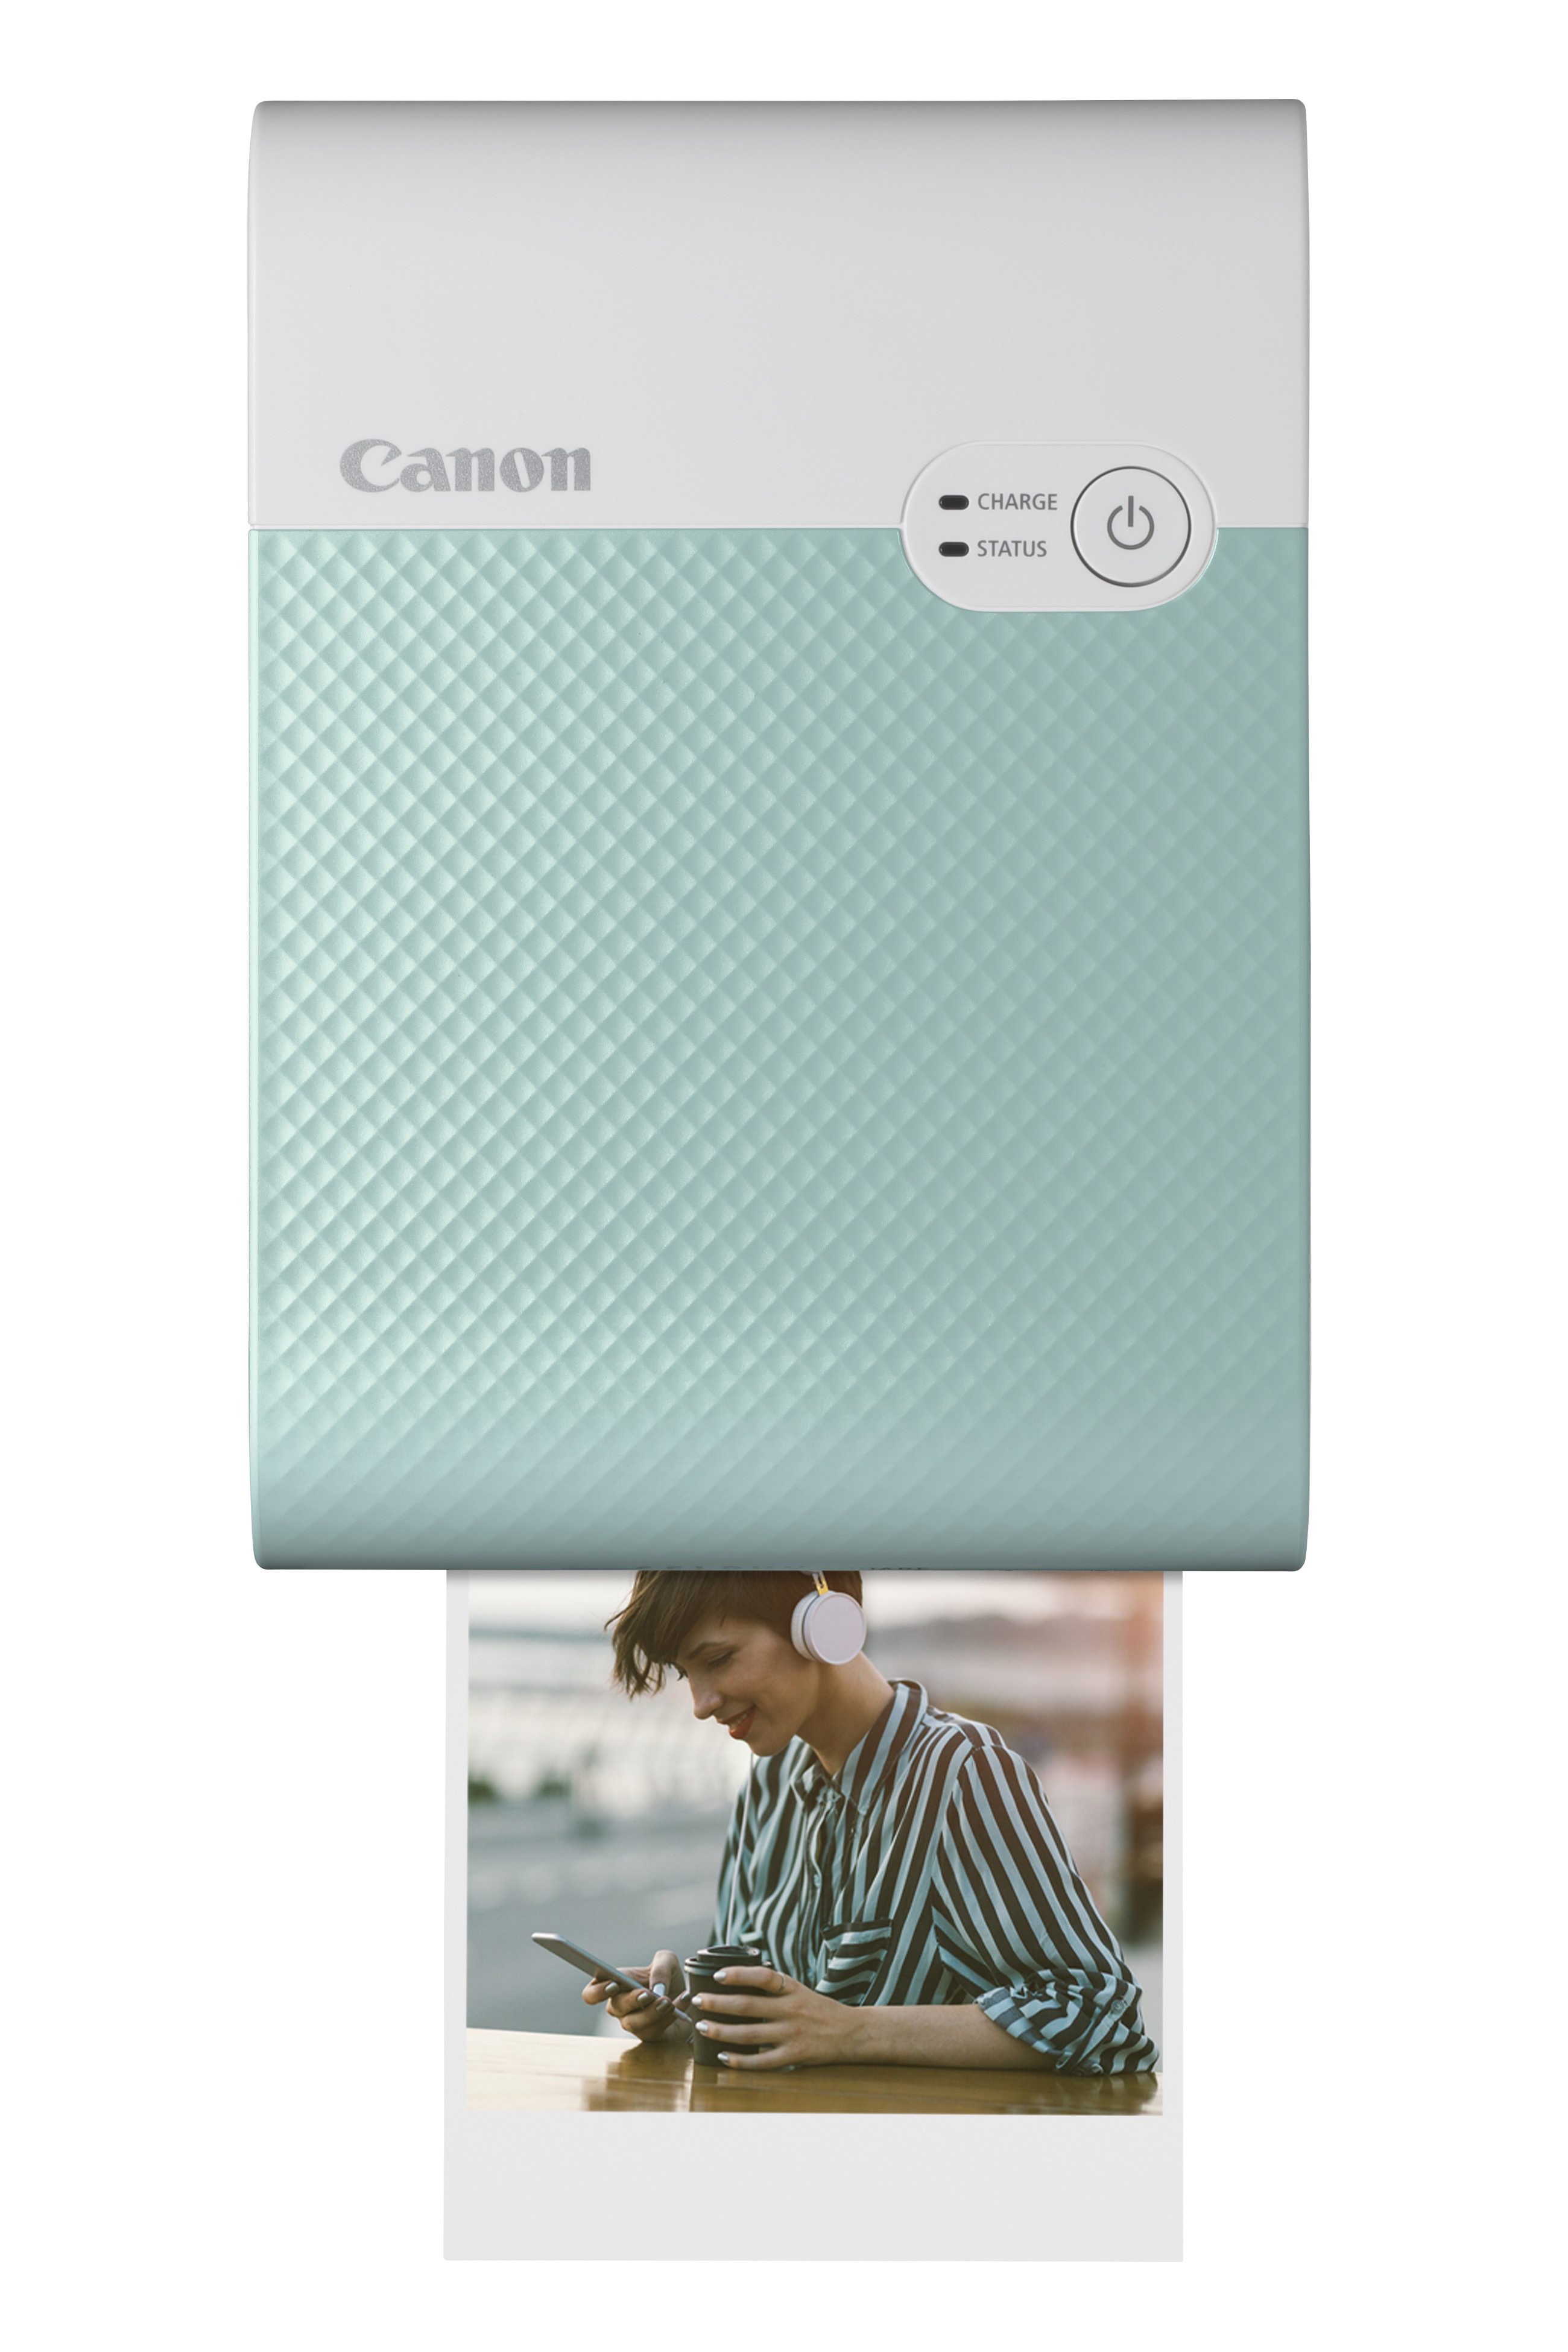 Canon launched SELPHY SQUARE QX10 Pocket Photo Printer - TGH Photography  and Travel Portal/Blog